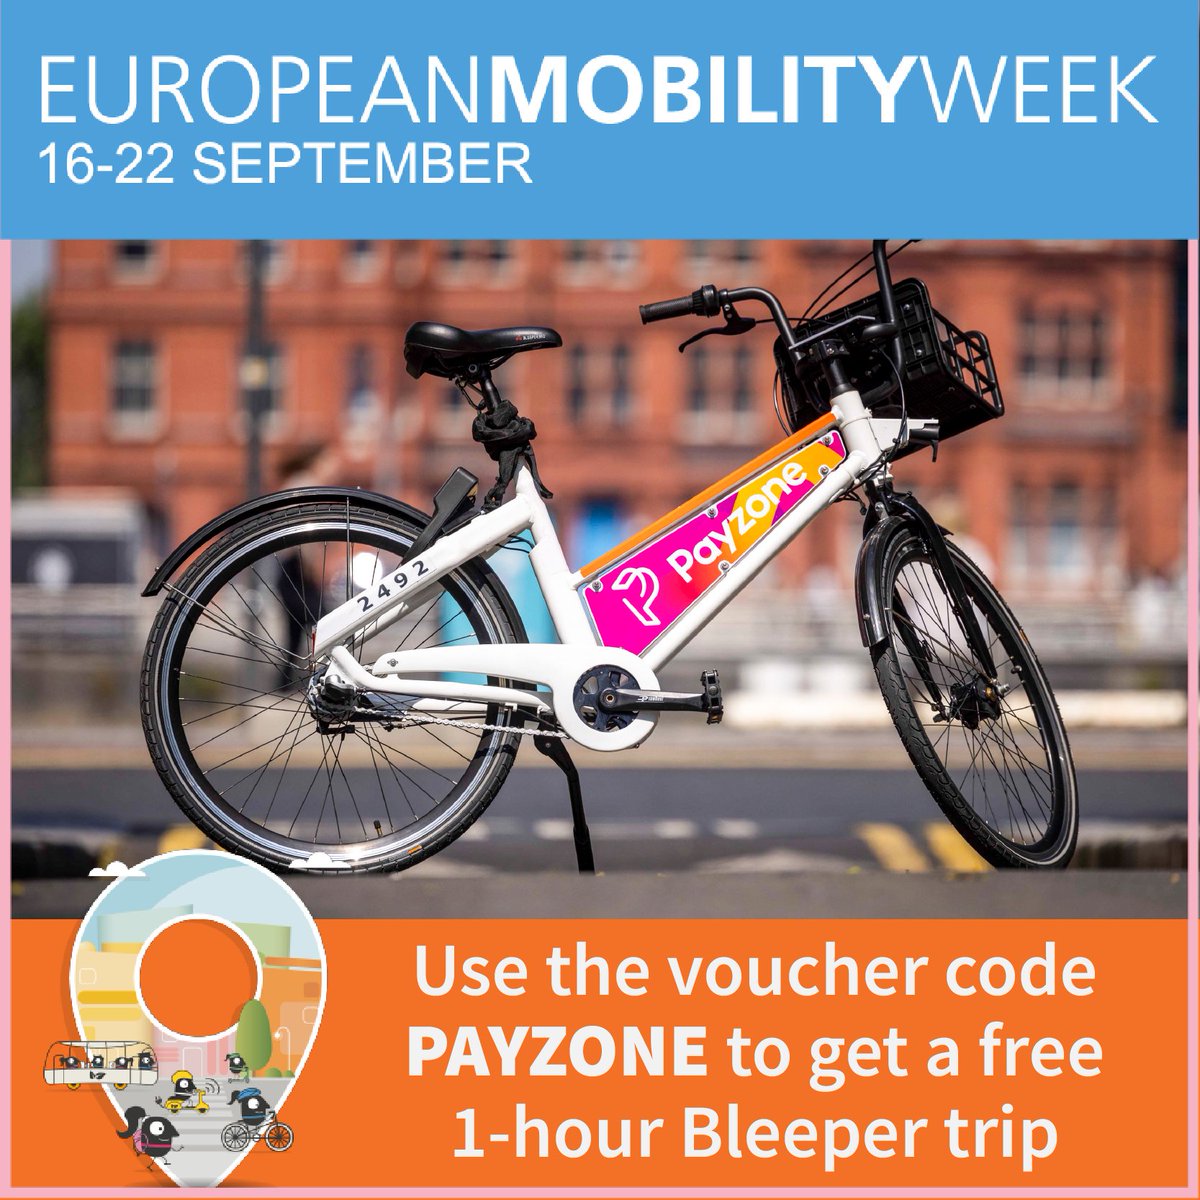 To celebrate #EuropeanMobilityWeek our sponsor Payzone is offering all Bleeper users a free 1-hour trip.

Go to your Wallet in the Bleeper app and use the voucher code PAYZONE 

There is one free 1-hour Bleeper trip per user and the voucher is valid until Sunday 24th September!